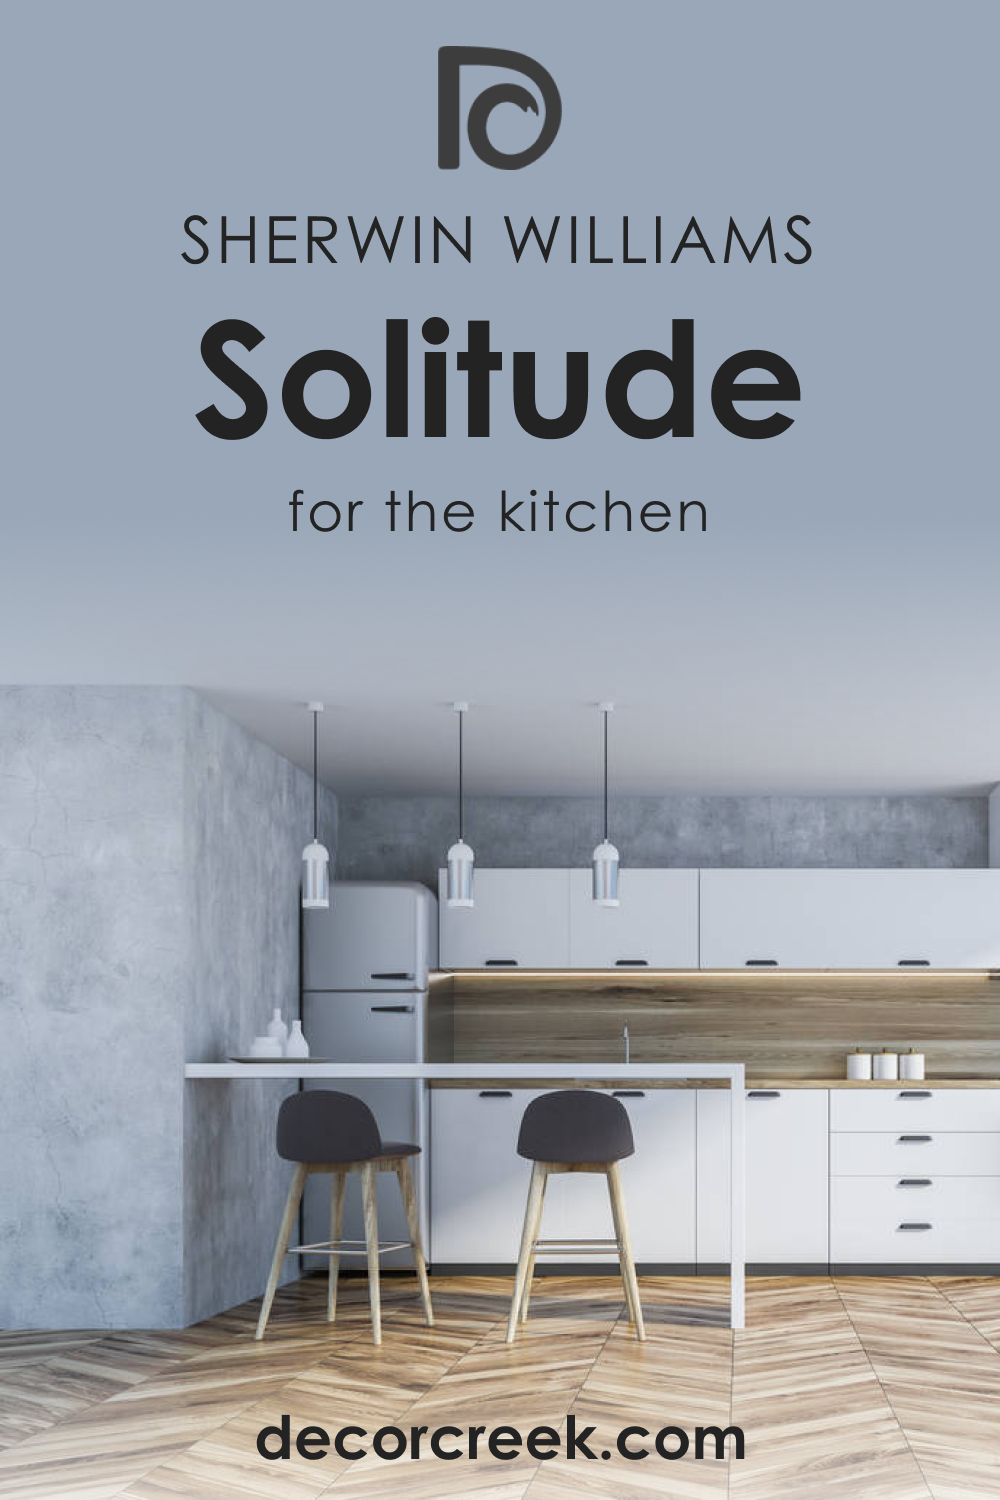 How to Use SW 6535 Solitude in the Kitchen?